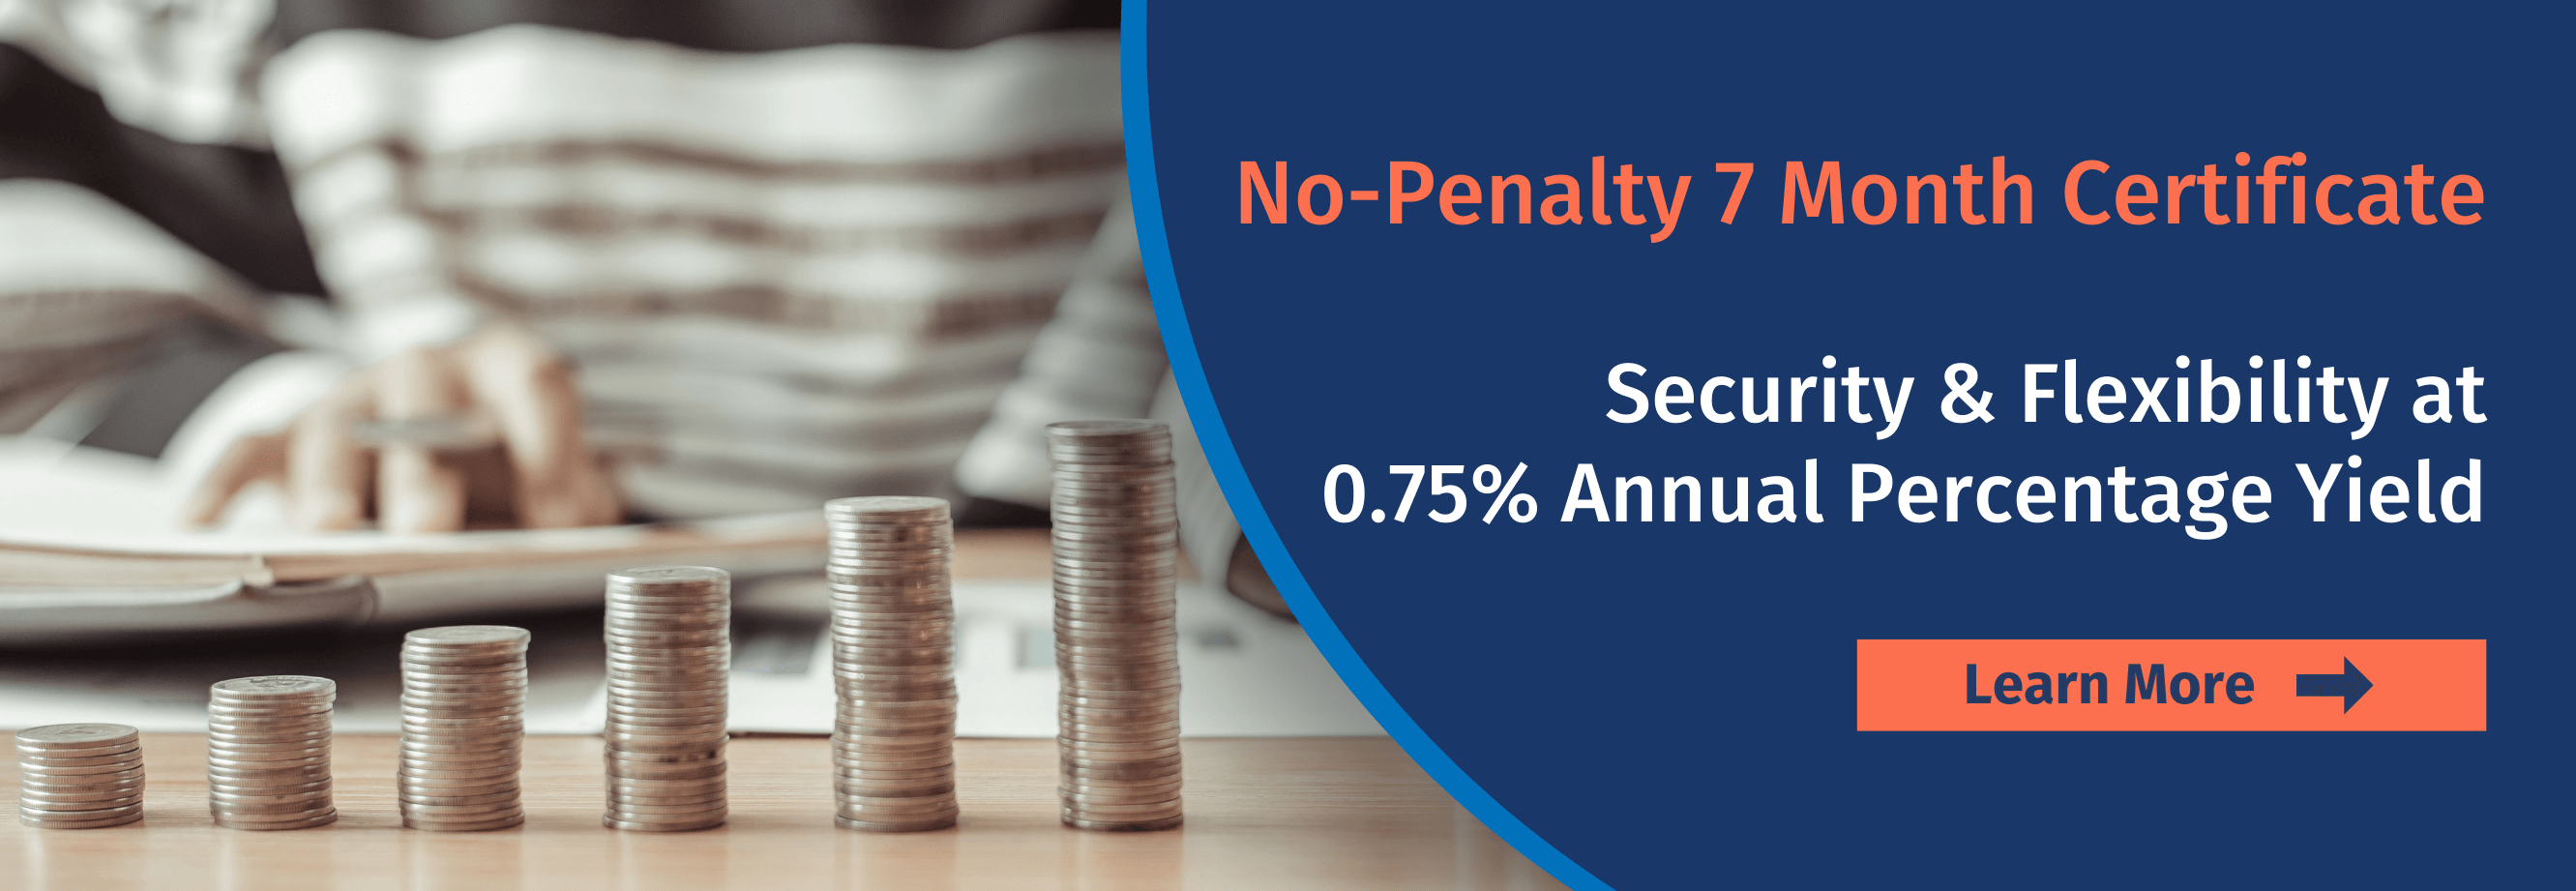 No-Penalty 7 Month Certificate